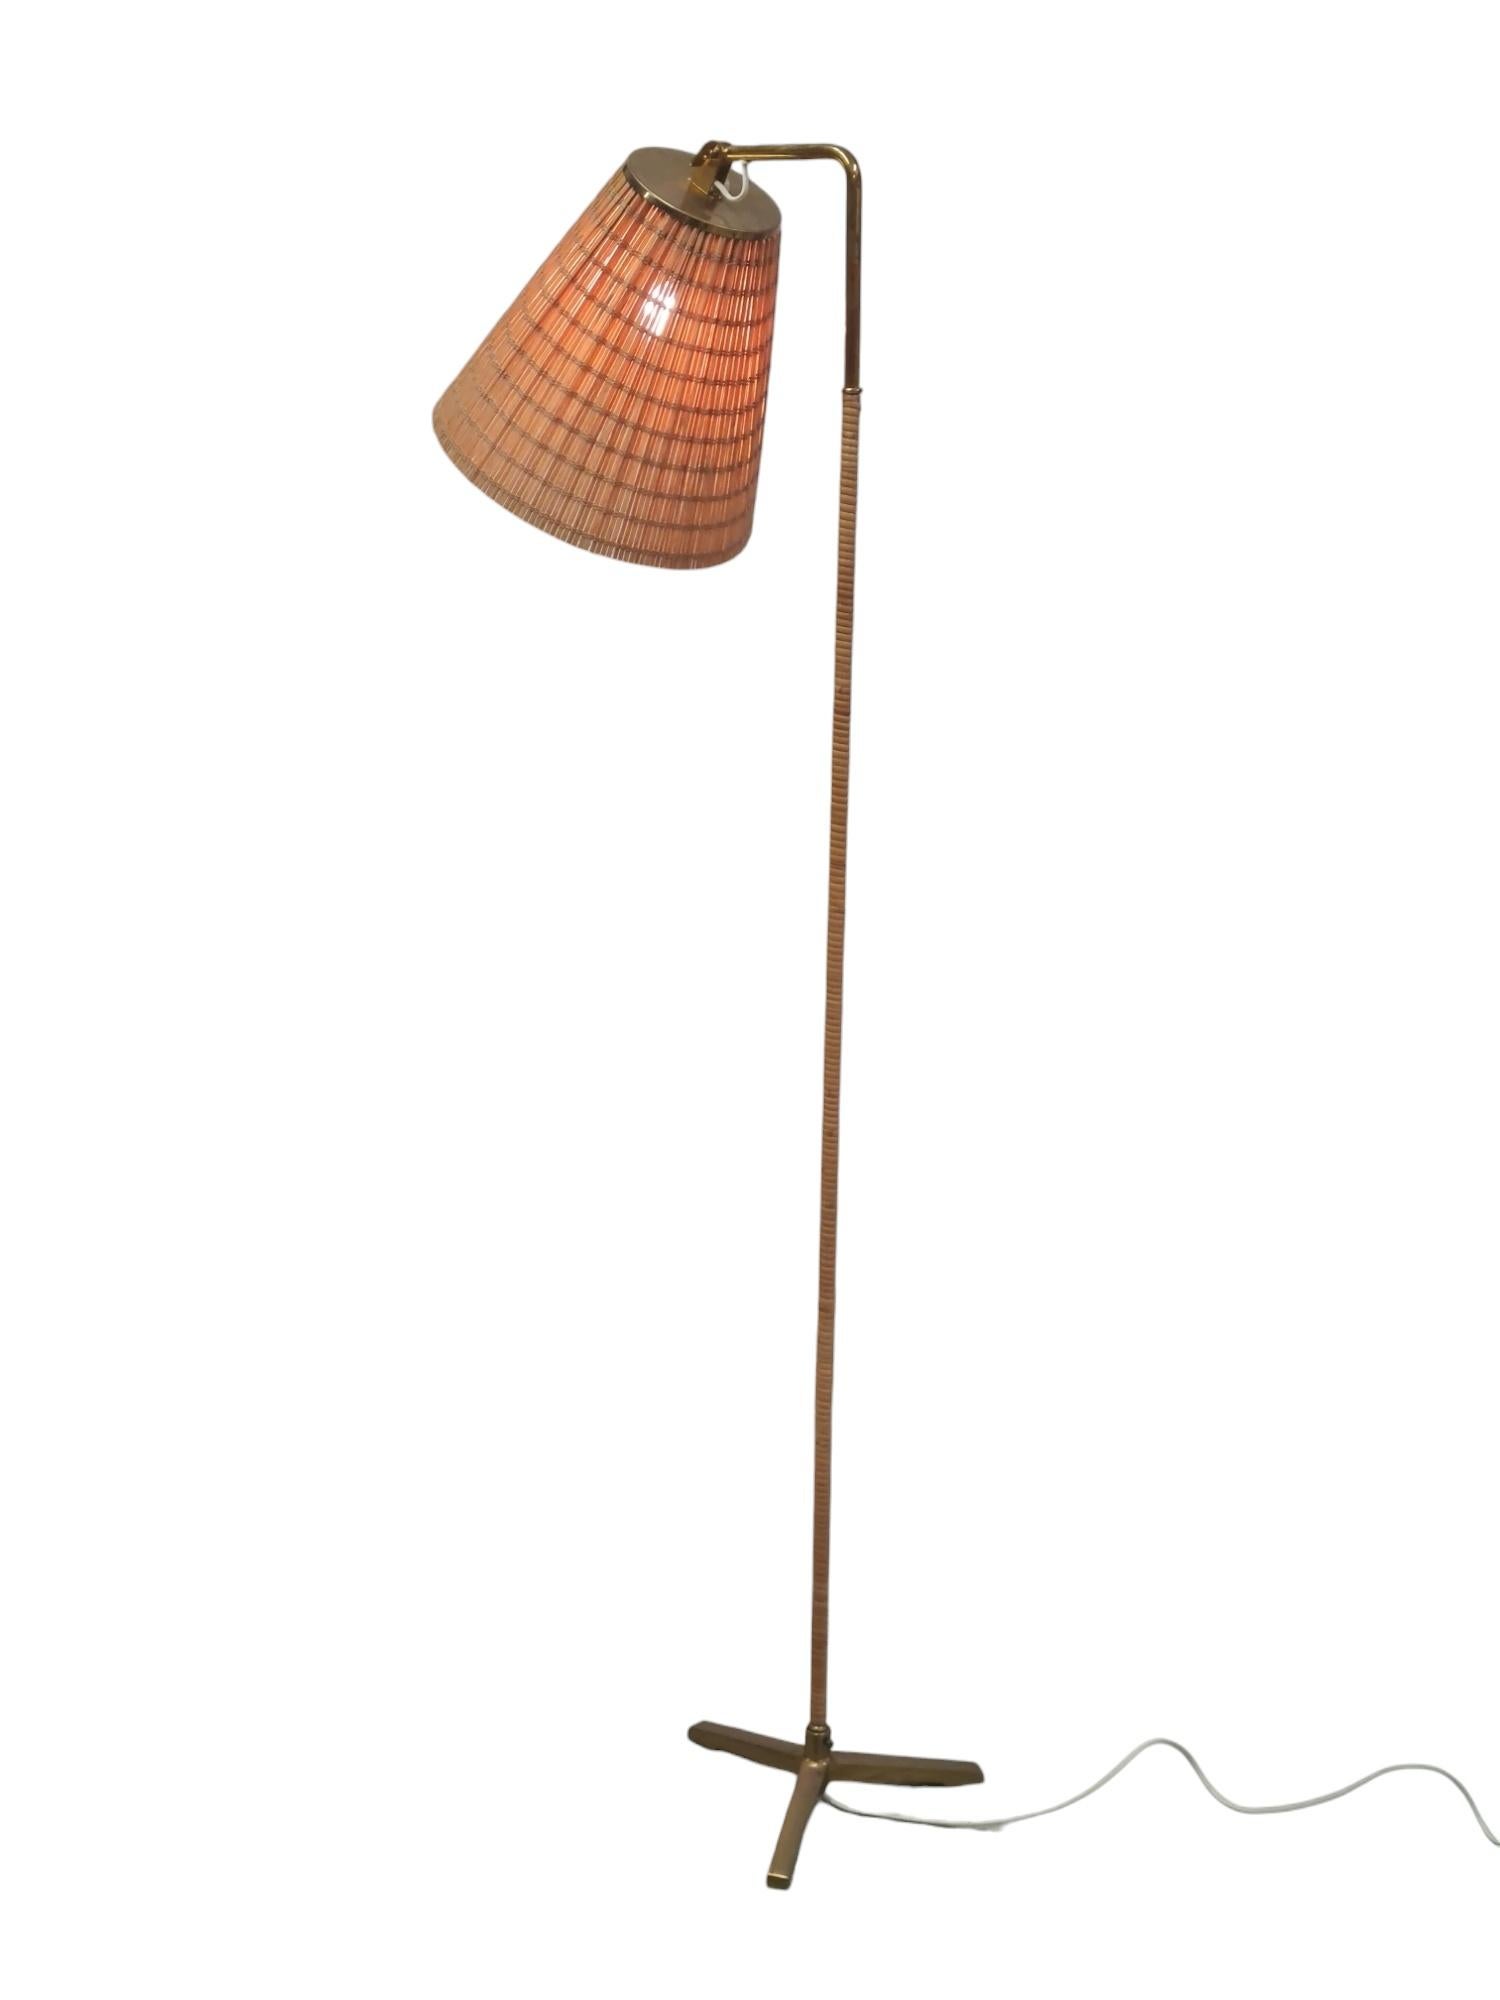 Lampadaire Paavo Tynell modèle 9631, Taito Oy en vente 2